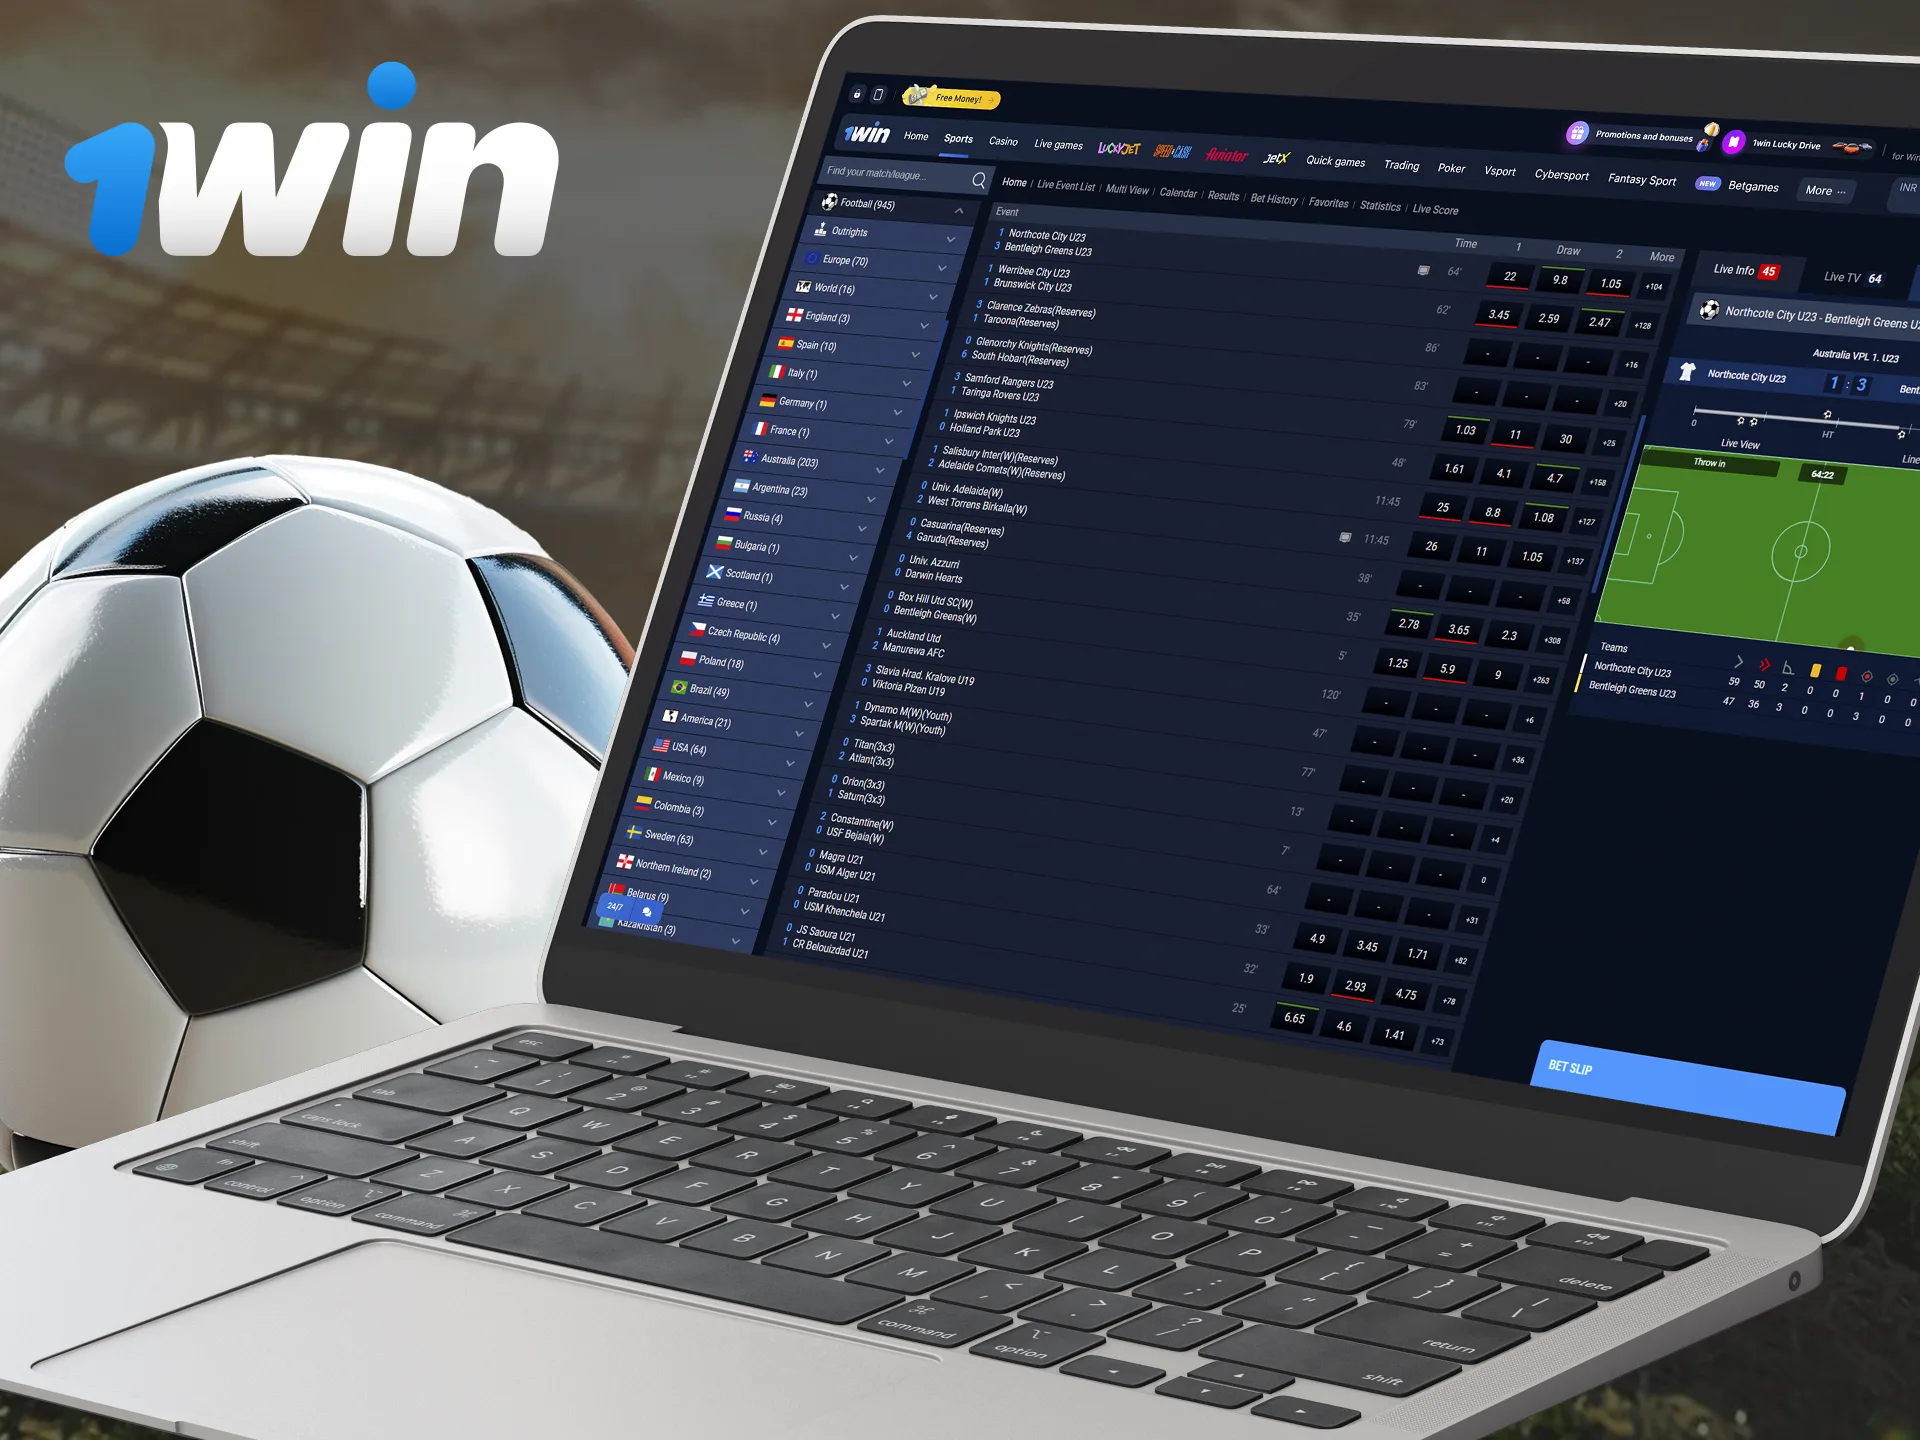 1Win is an excellent choice for football betting.